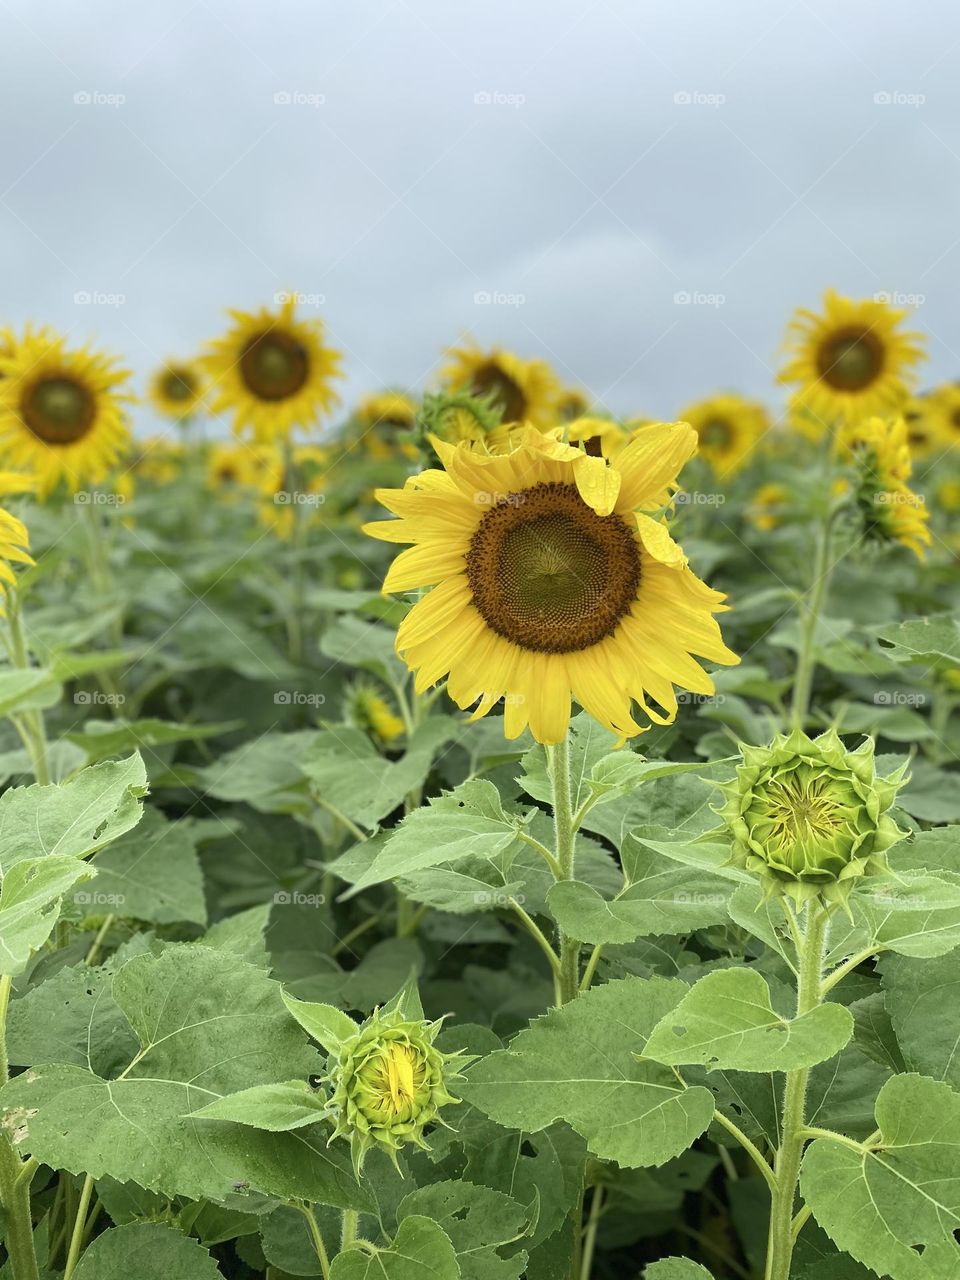 Field of sunflowers with a stormy sky 